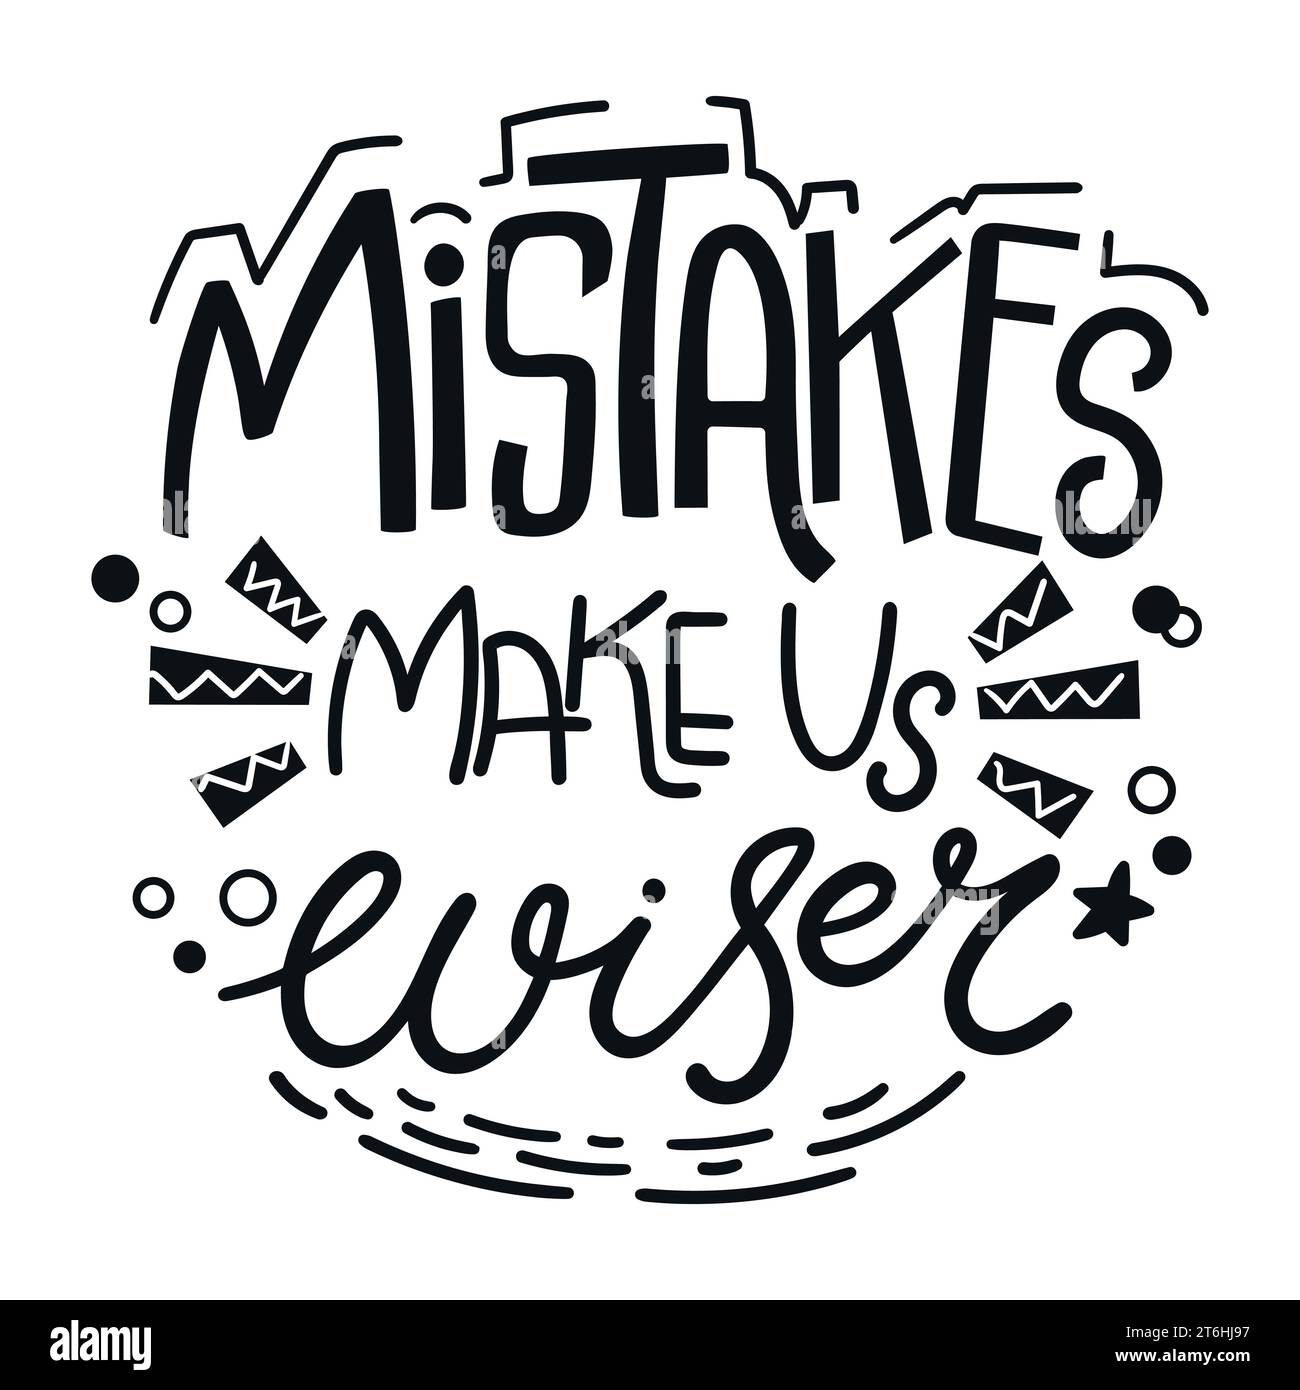 Mistakes make us wiser quote. Hand drawn motivational phrase. Vector illustration Stock Vector